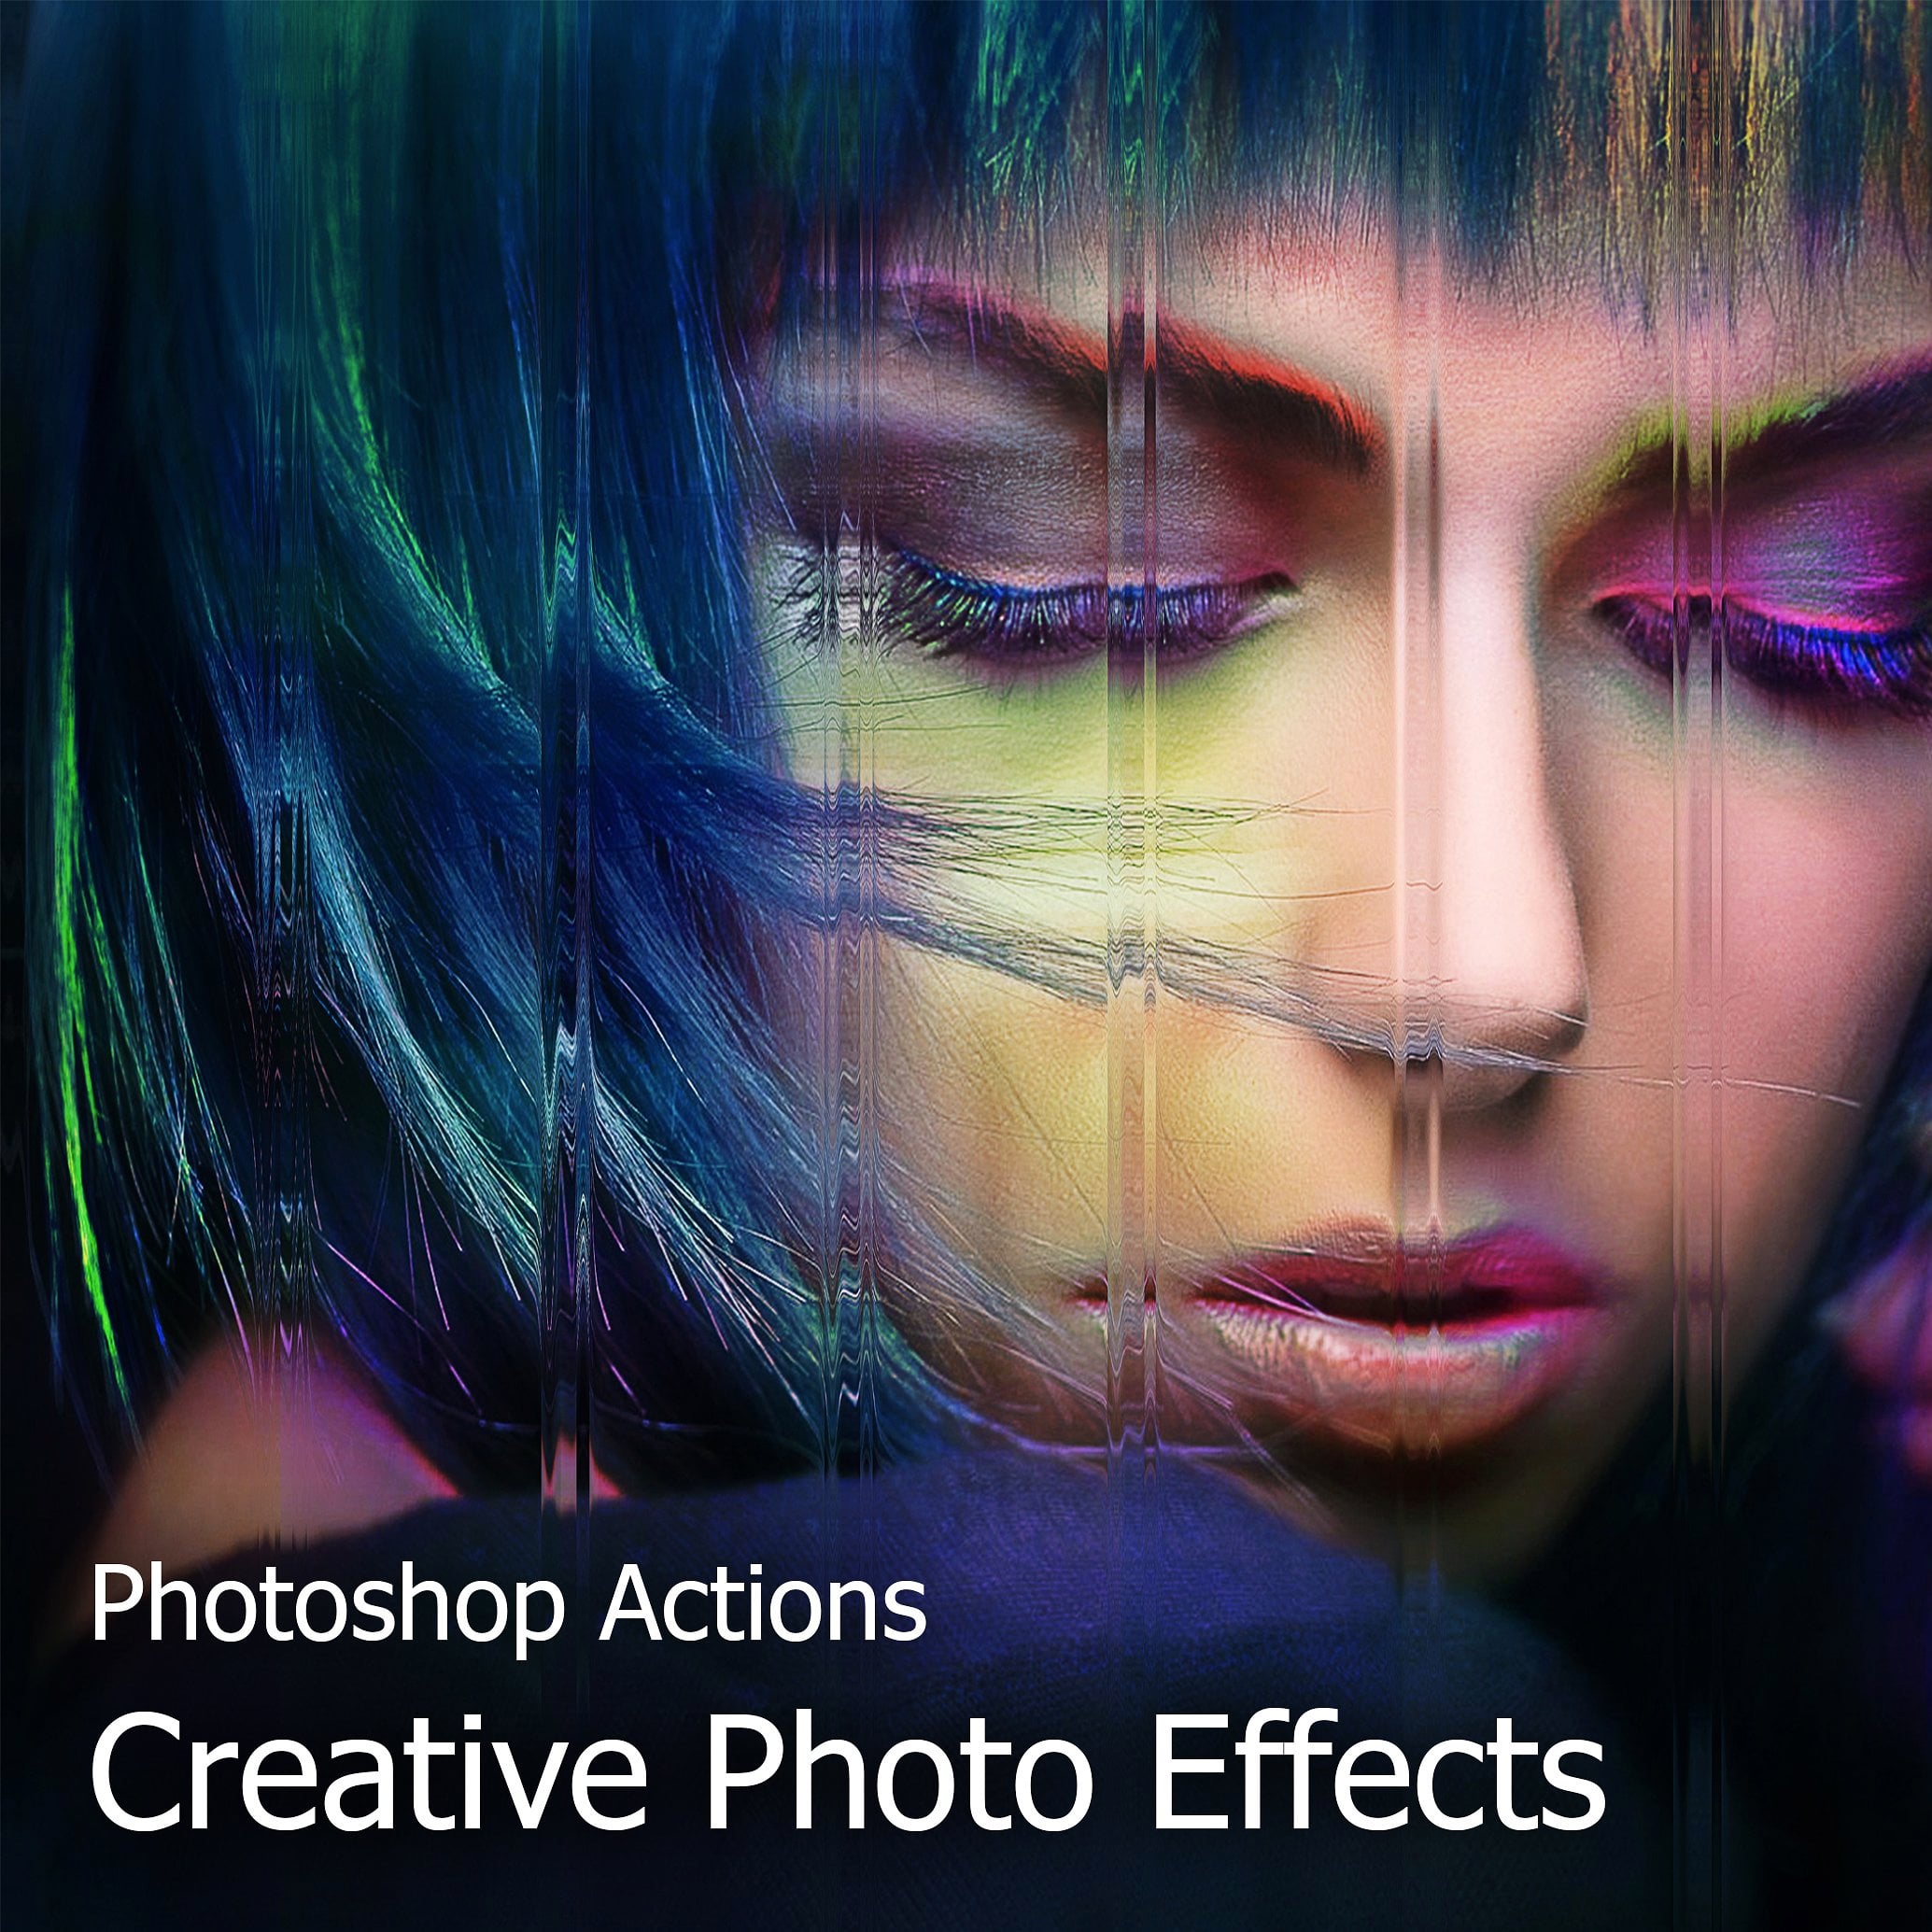 Creative Photo Effects main cover.